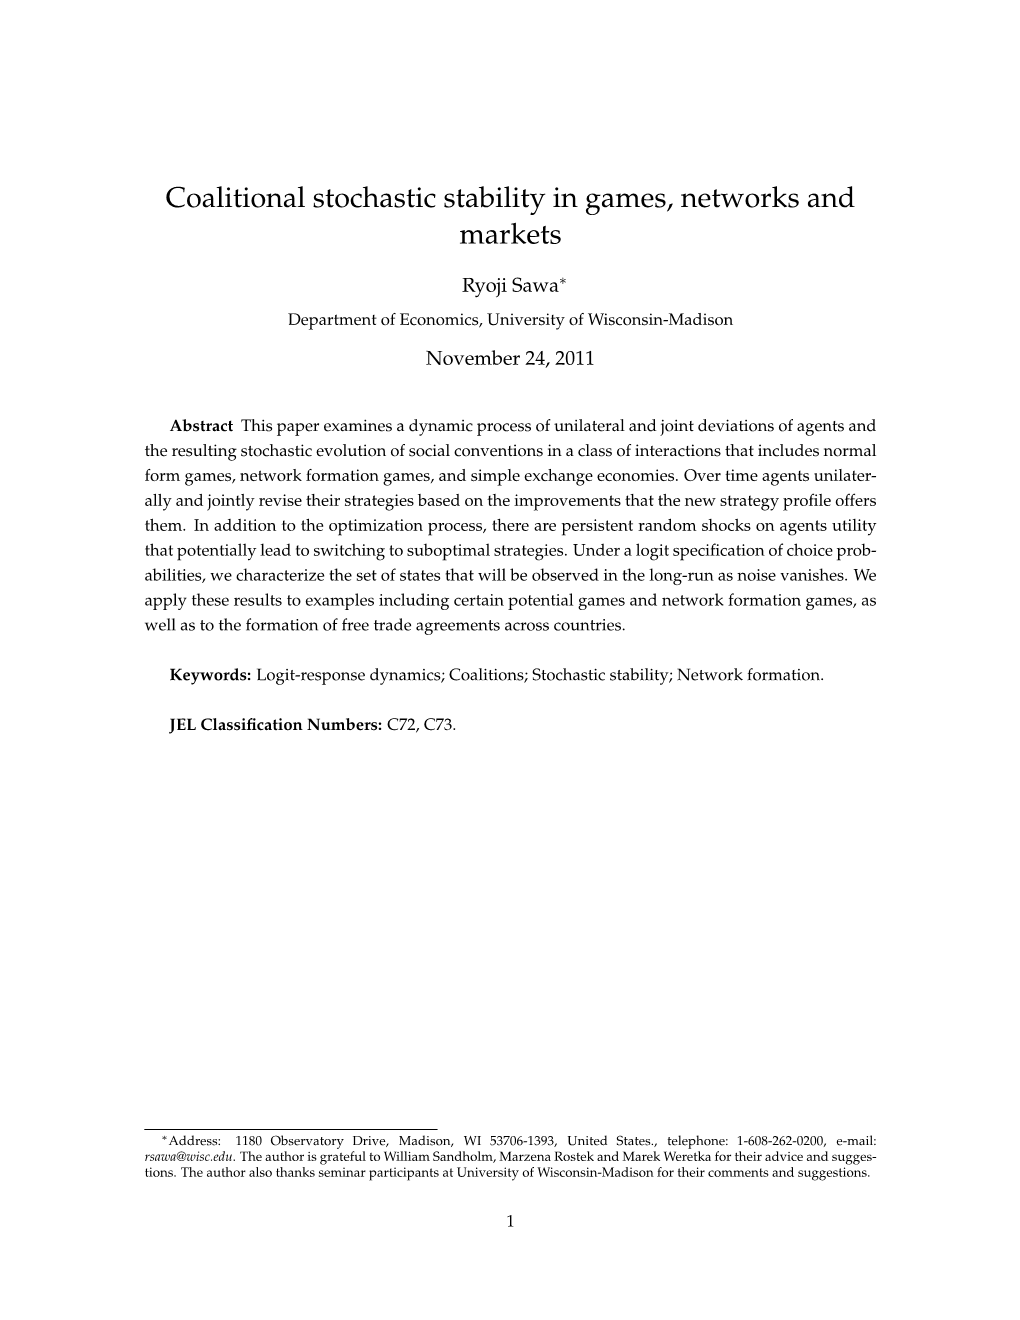 Coalitional Stochastic Stability in Games, Networks and Markets